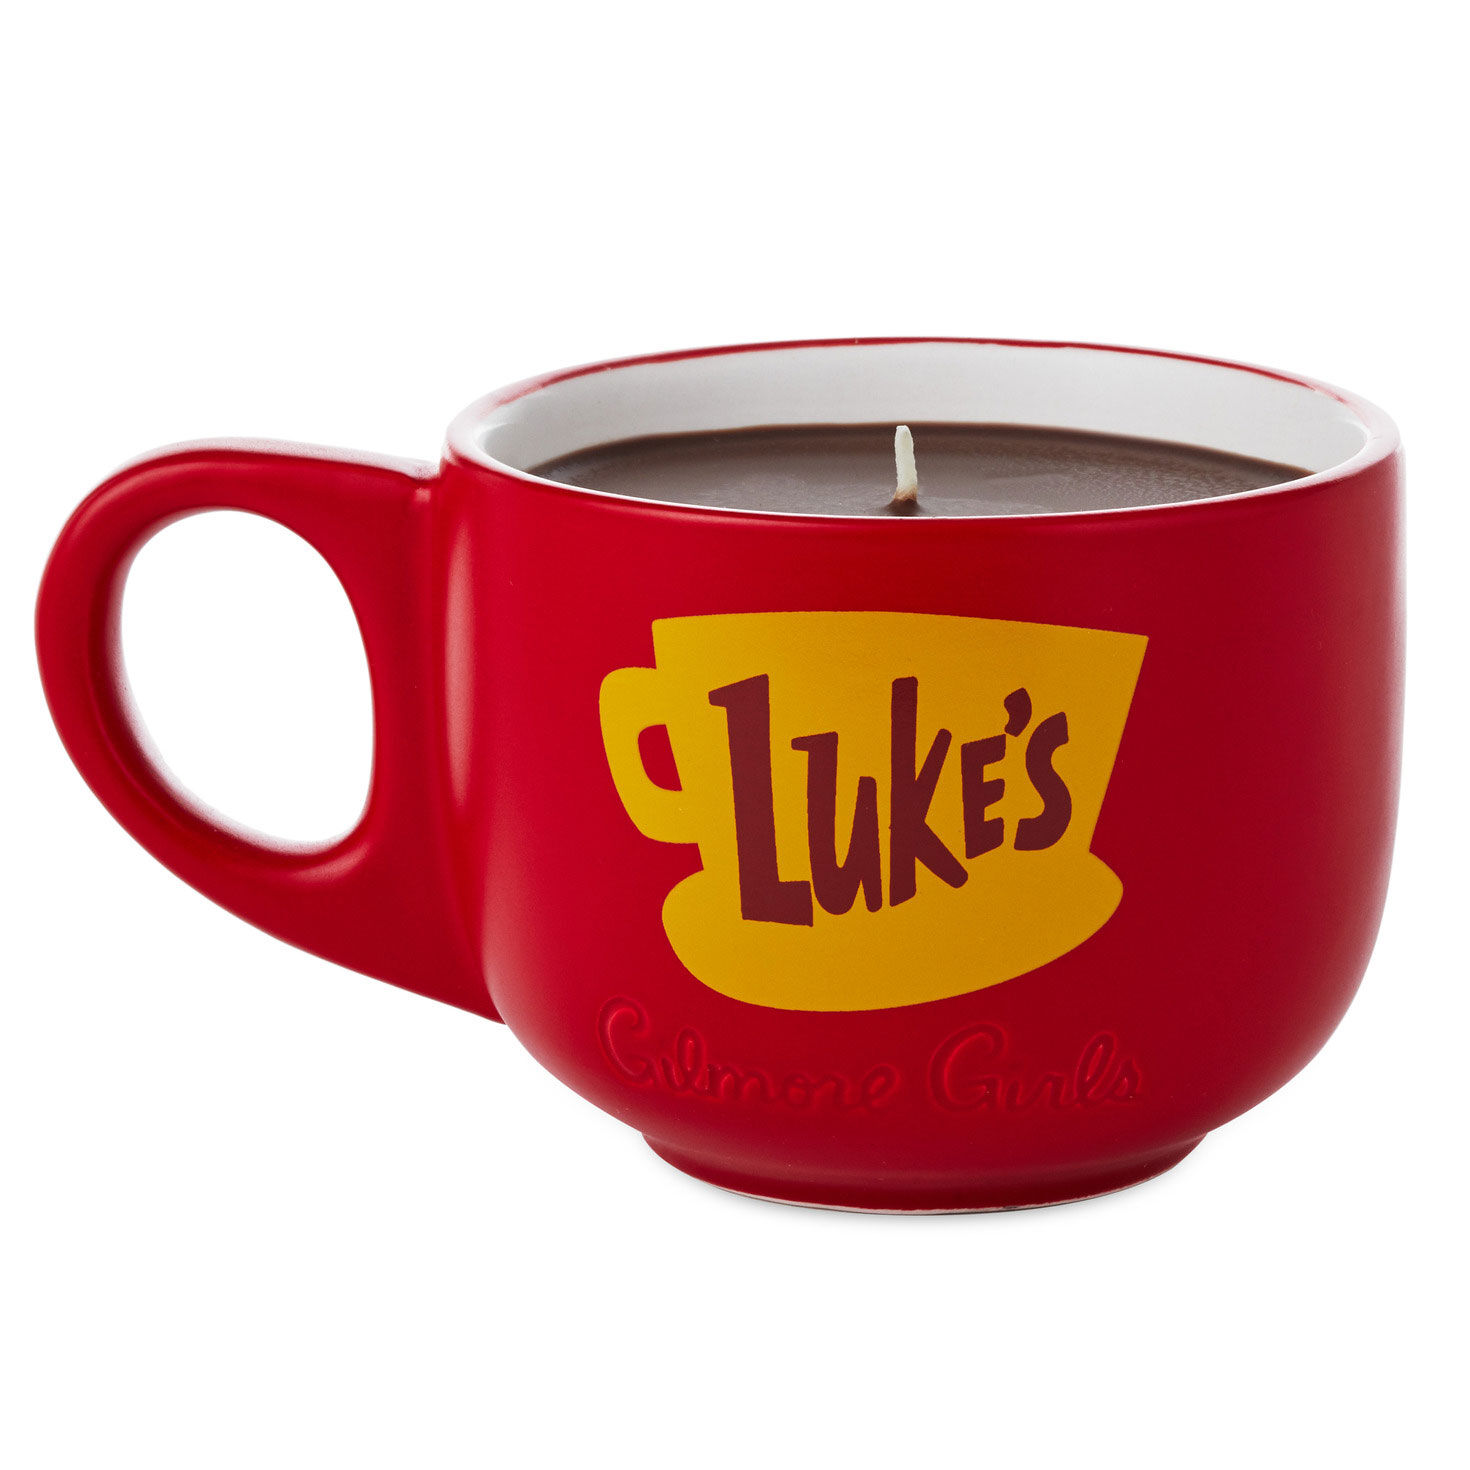 https://www.hallmark.com/dw/image/v2/AALB_PRD/on/demandware.static/-/Sites-hallmark-master/default/dw0e787226/images/finished-goods/products/1PCL1012/Gilmore-Girls-CoffeeScented-Candle-in-Lukes-Diner-Mug_1PCL1012_01.jpg?sfrm=jpg